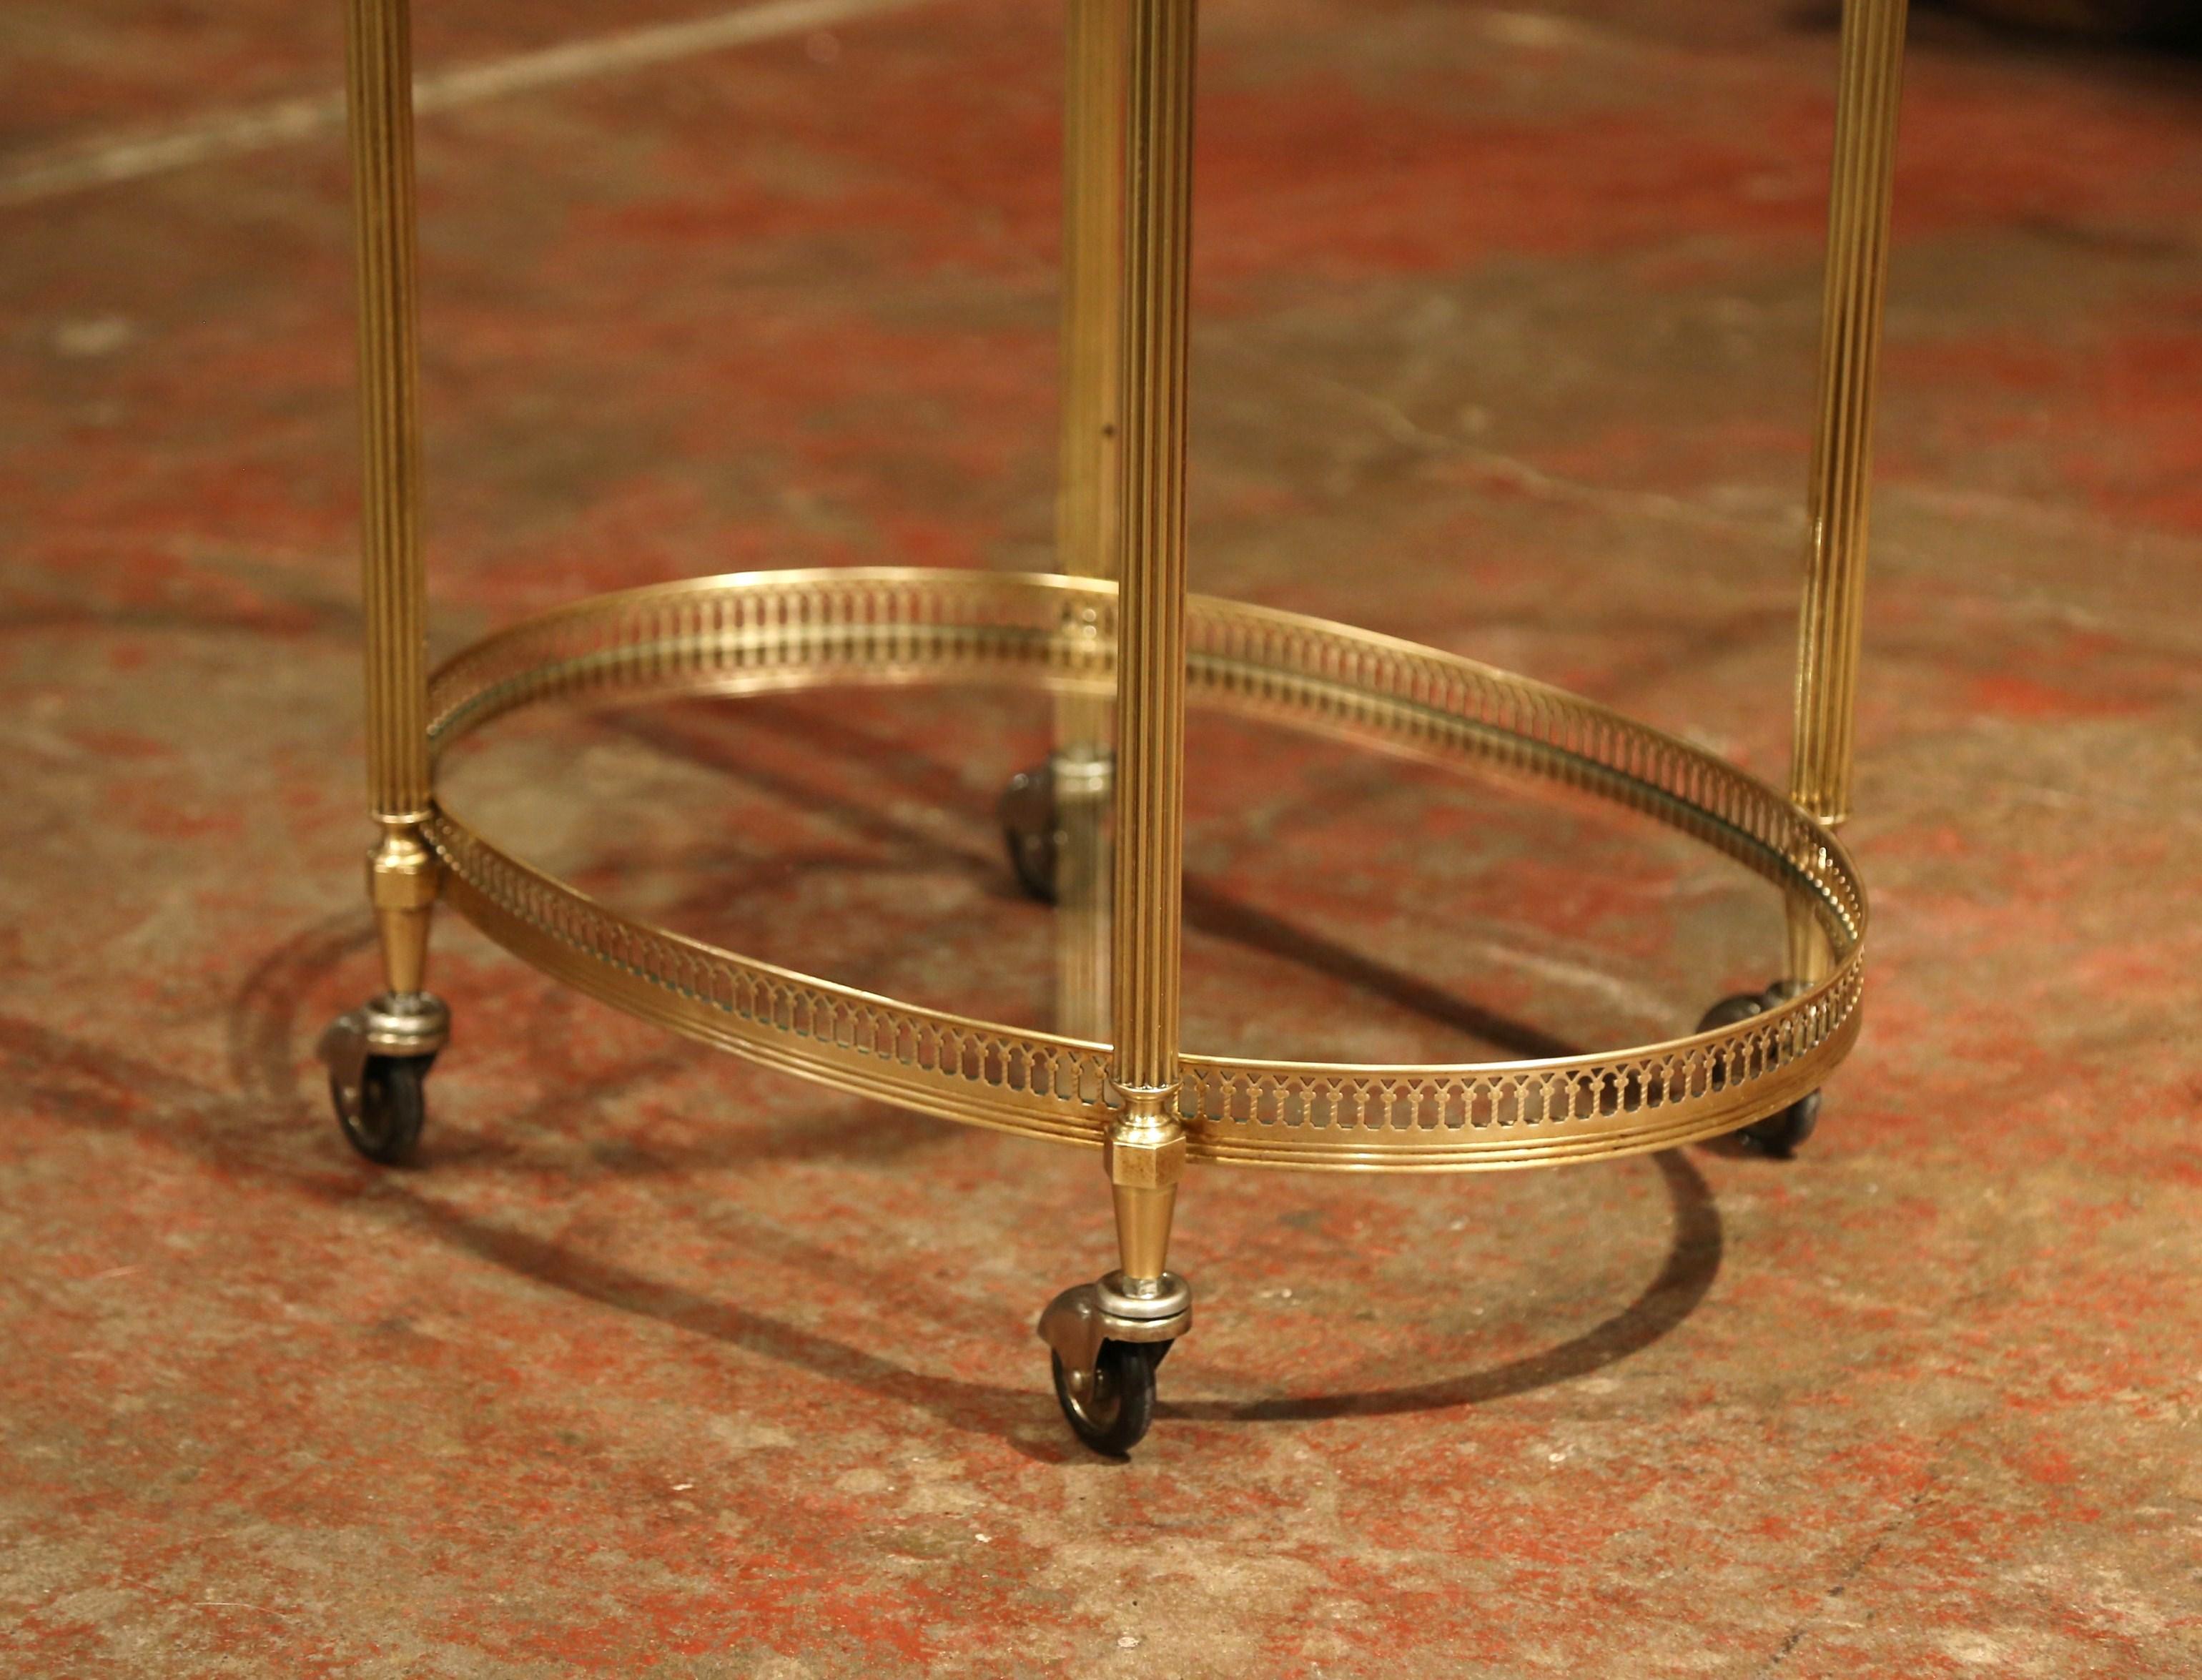 Hand-Crafted Early 20th Century, French Polished Brass Dessert Table or Bar Cart on Wheels